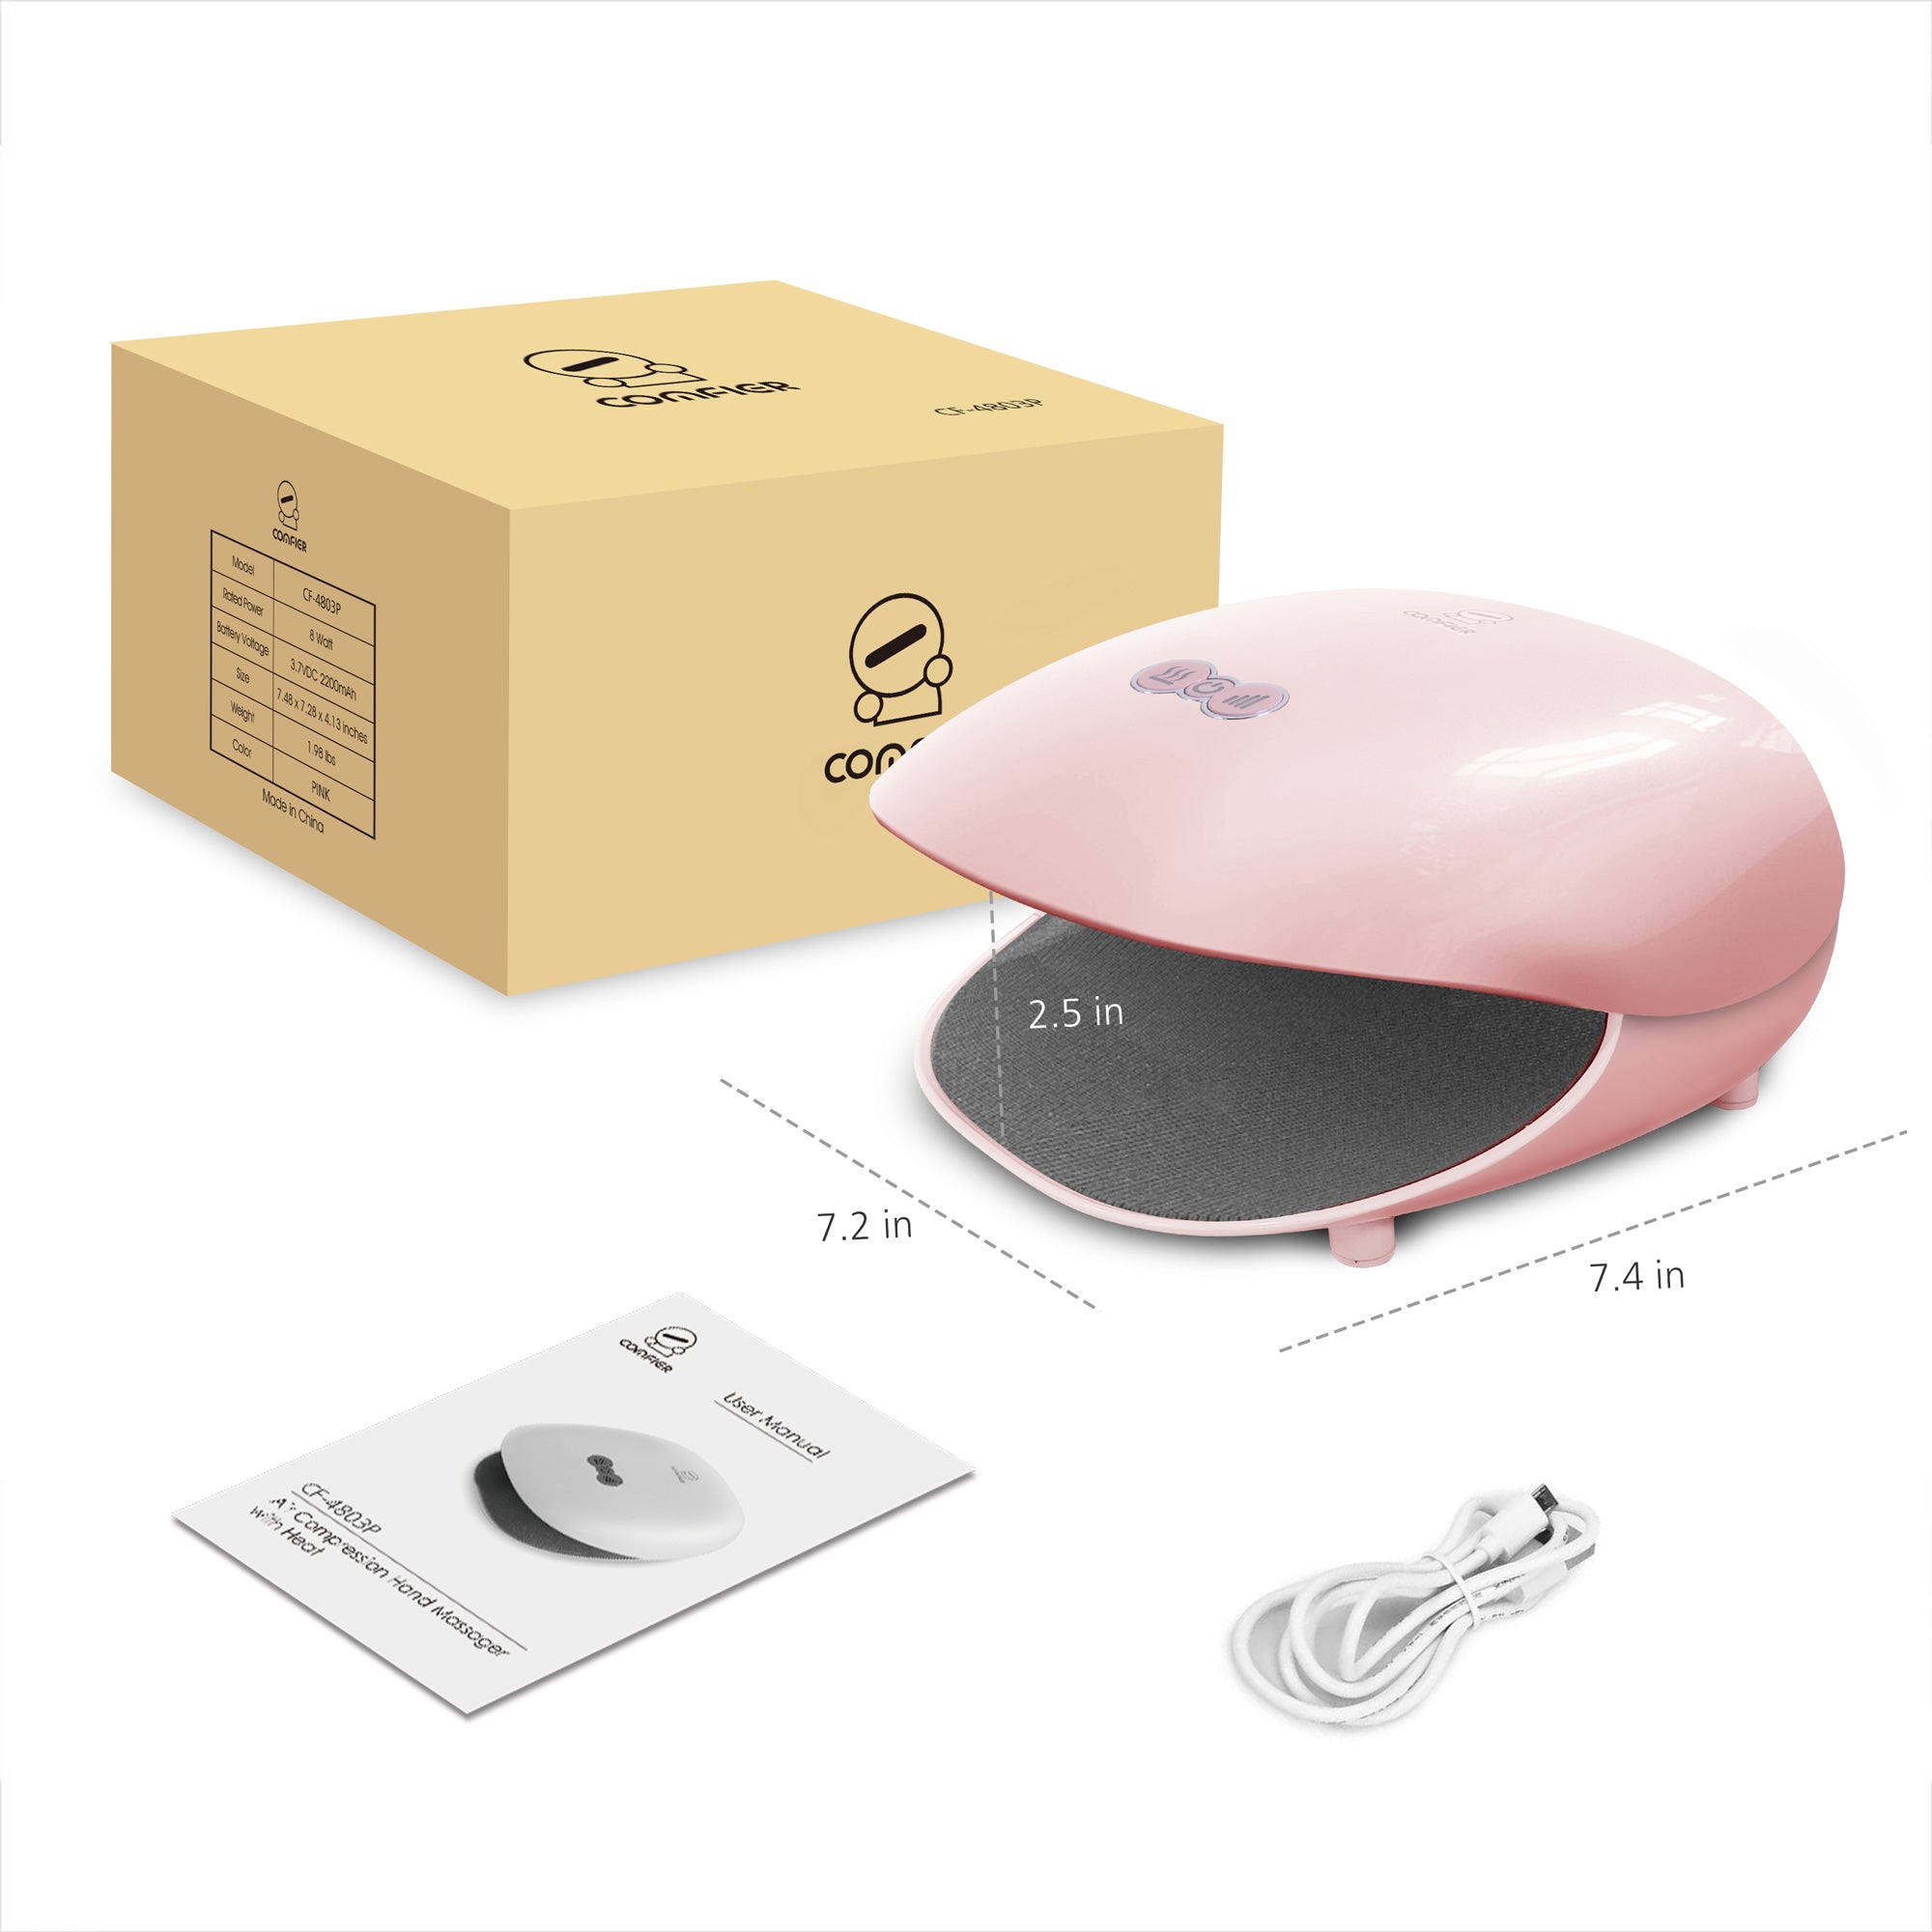 Comfier Cordless Hand Massager Machine with Heat for Carpal Tunnel hand pain relief(Pink) - 4803P